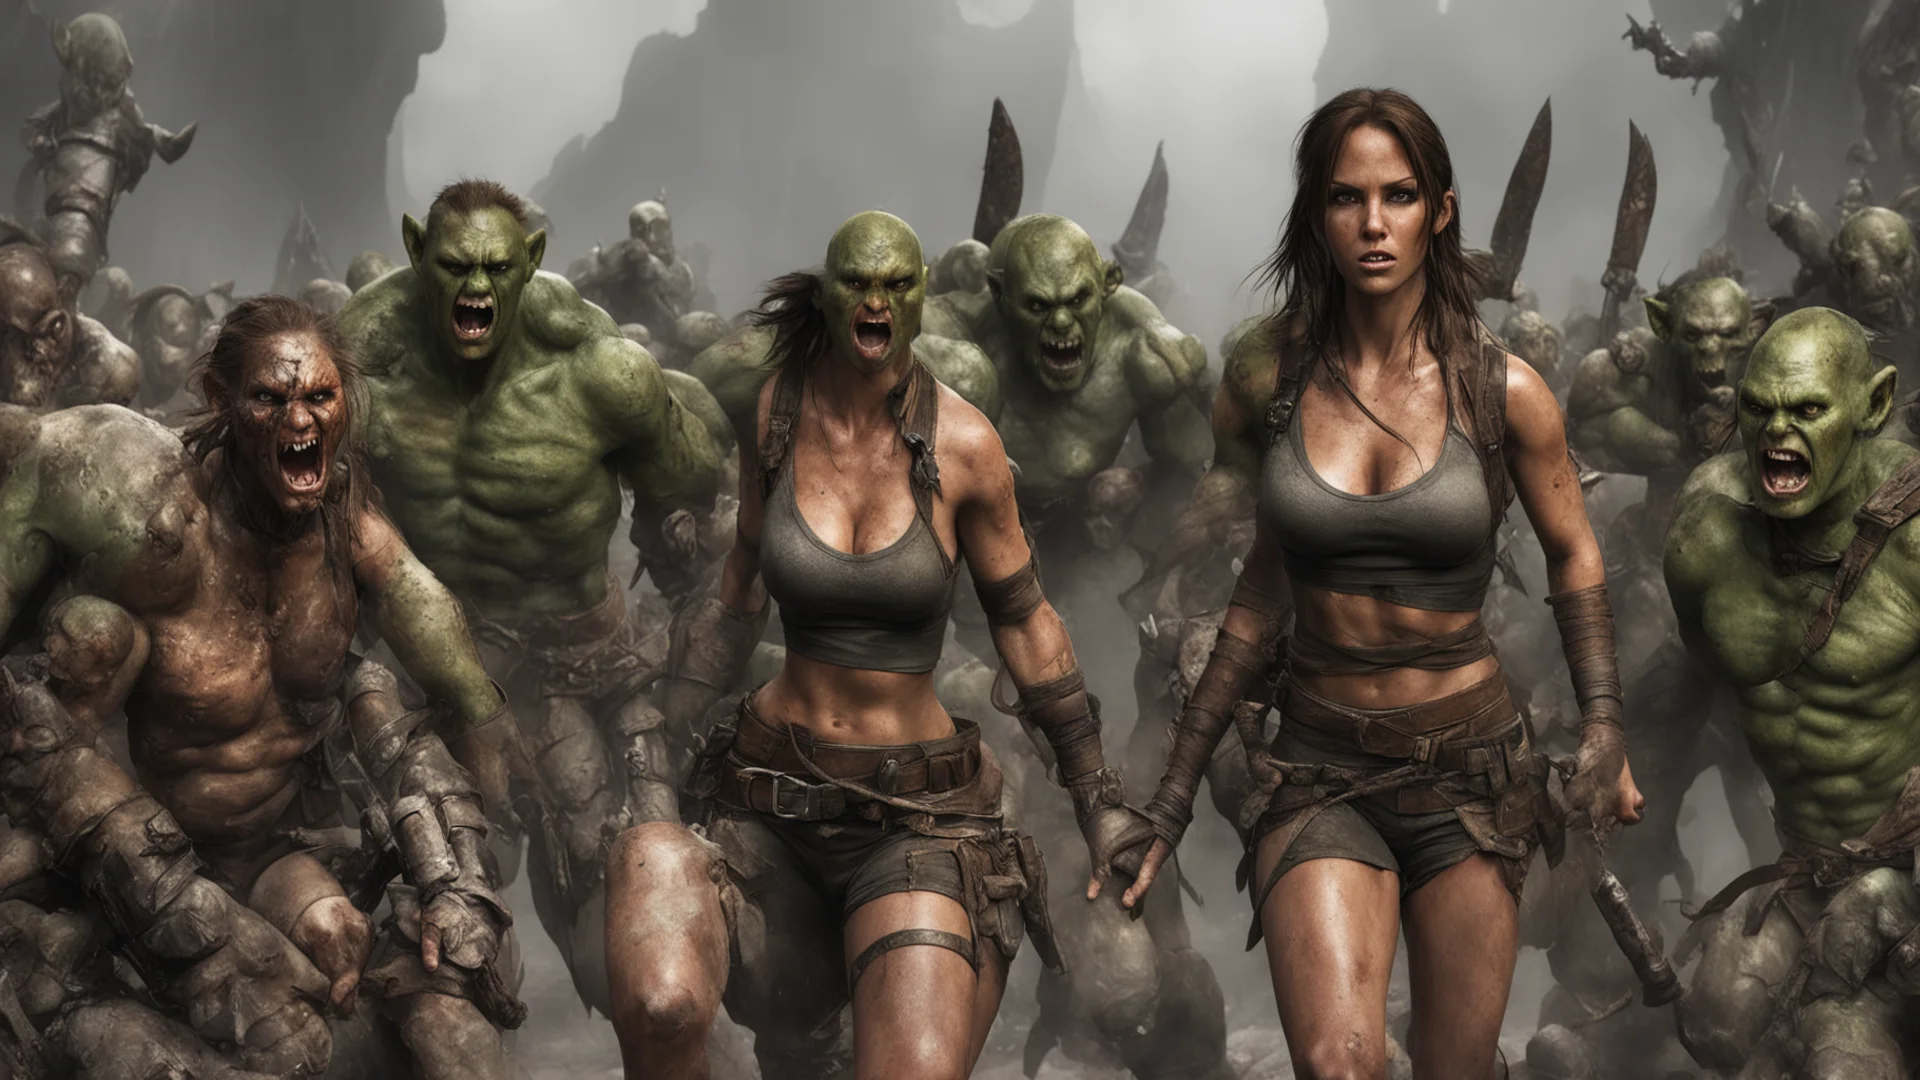 aiamazing fallen lara croft surrounded by angry orcs awesome portrait 2 wide